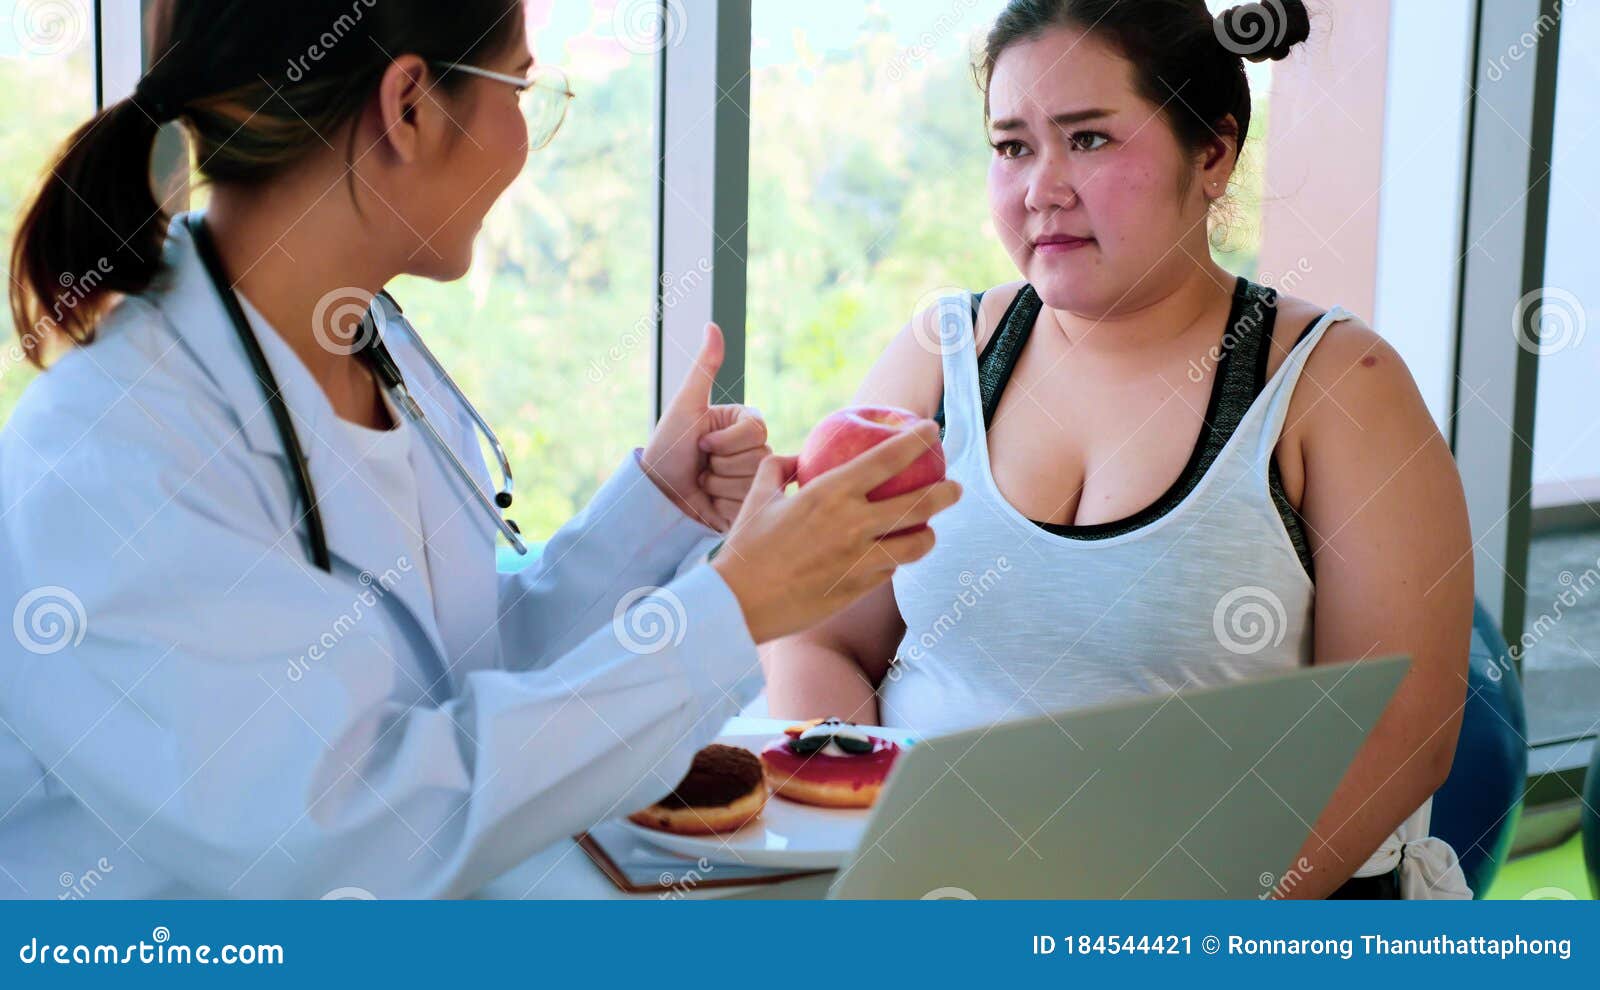 Female Doctor Suggesting Chubby Woman To Eat Apple Stock Image Image Of Doughnut Junkfood 